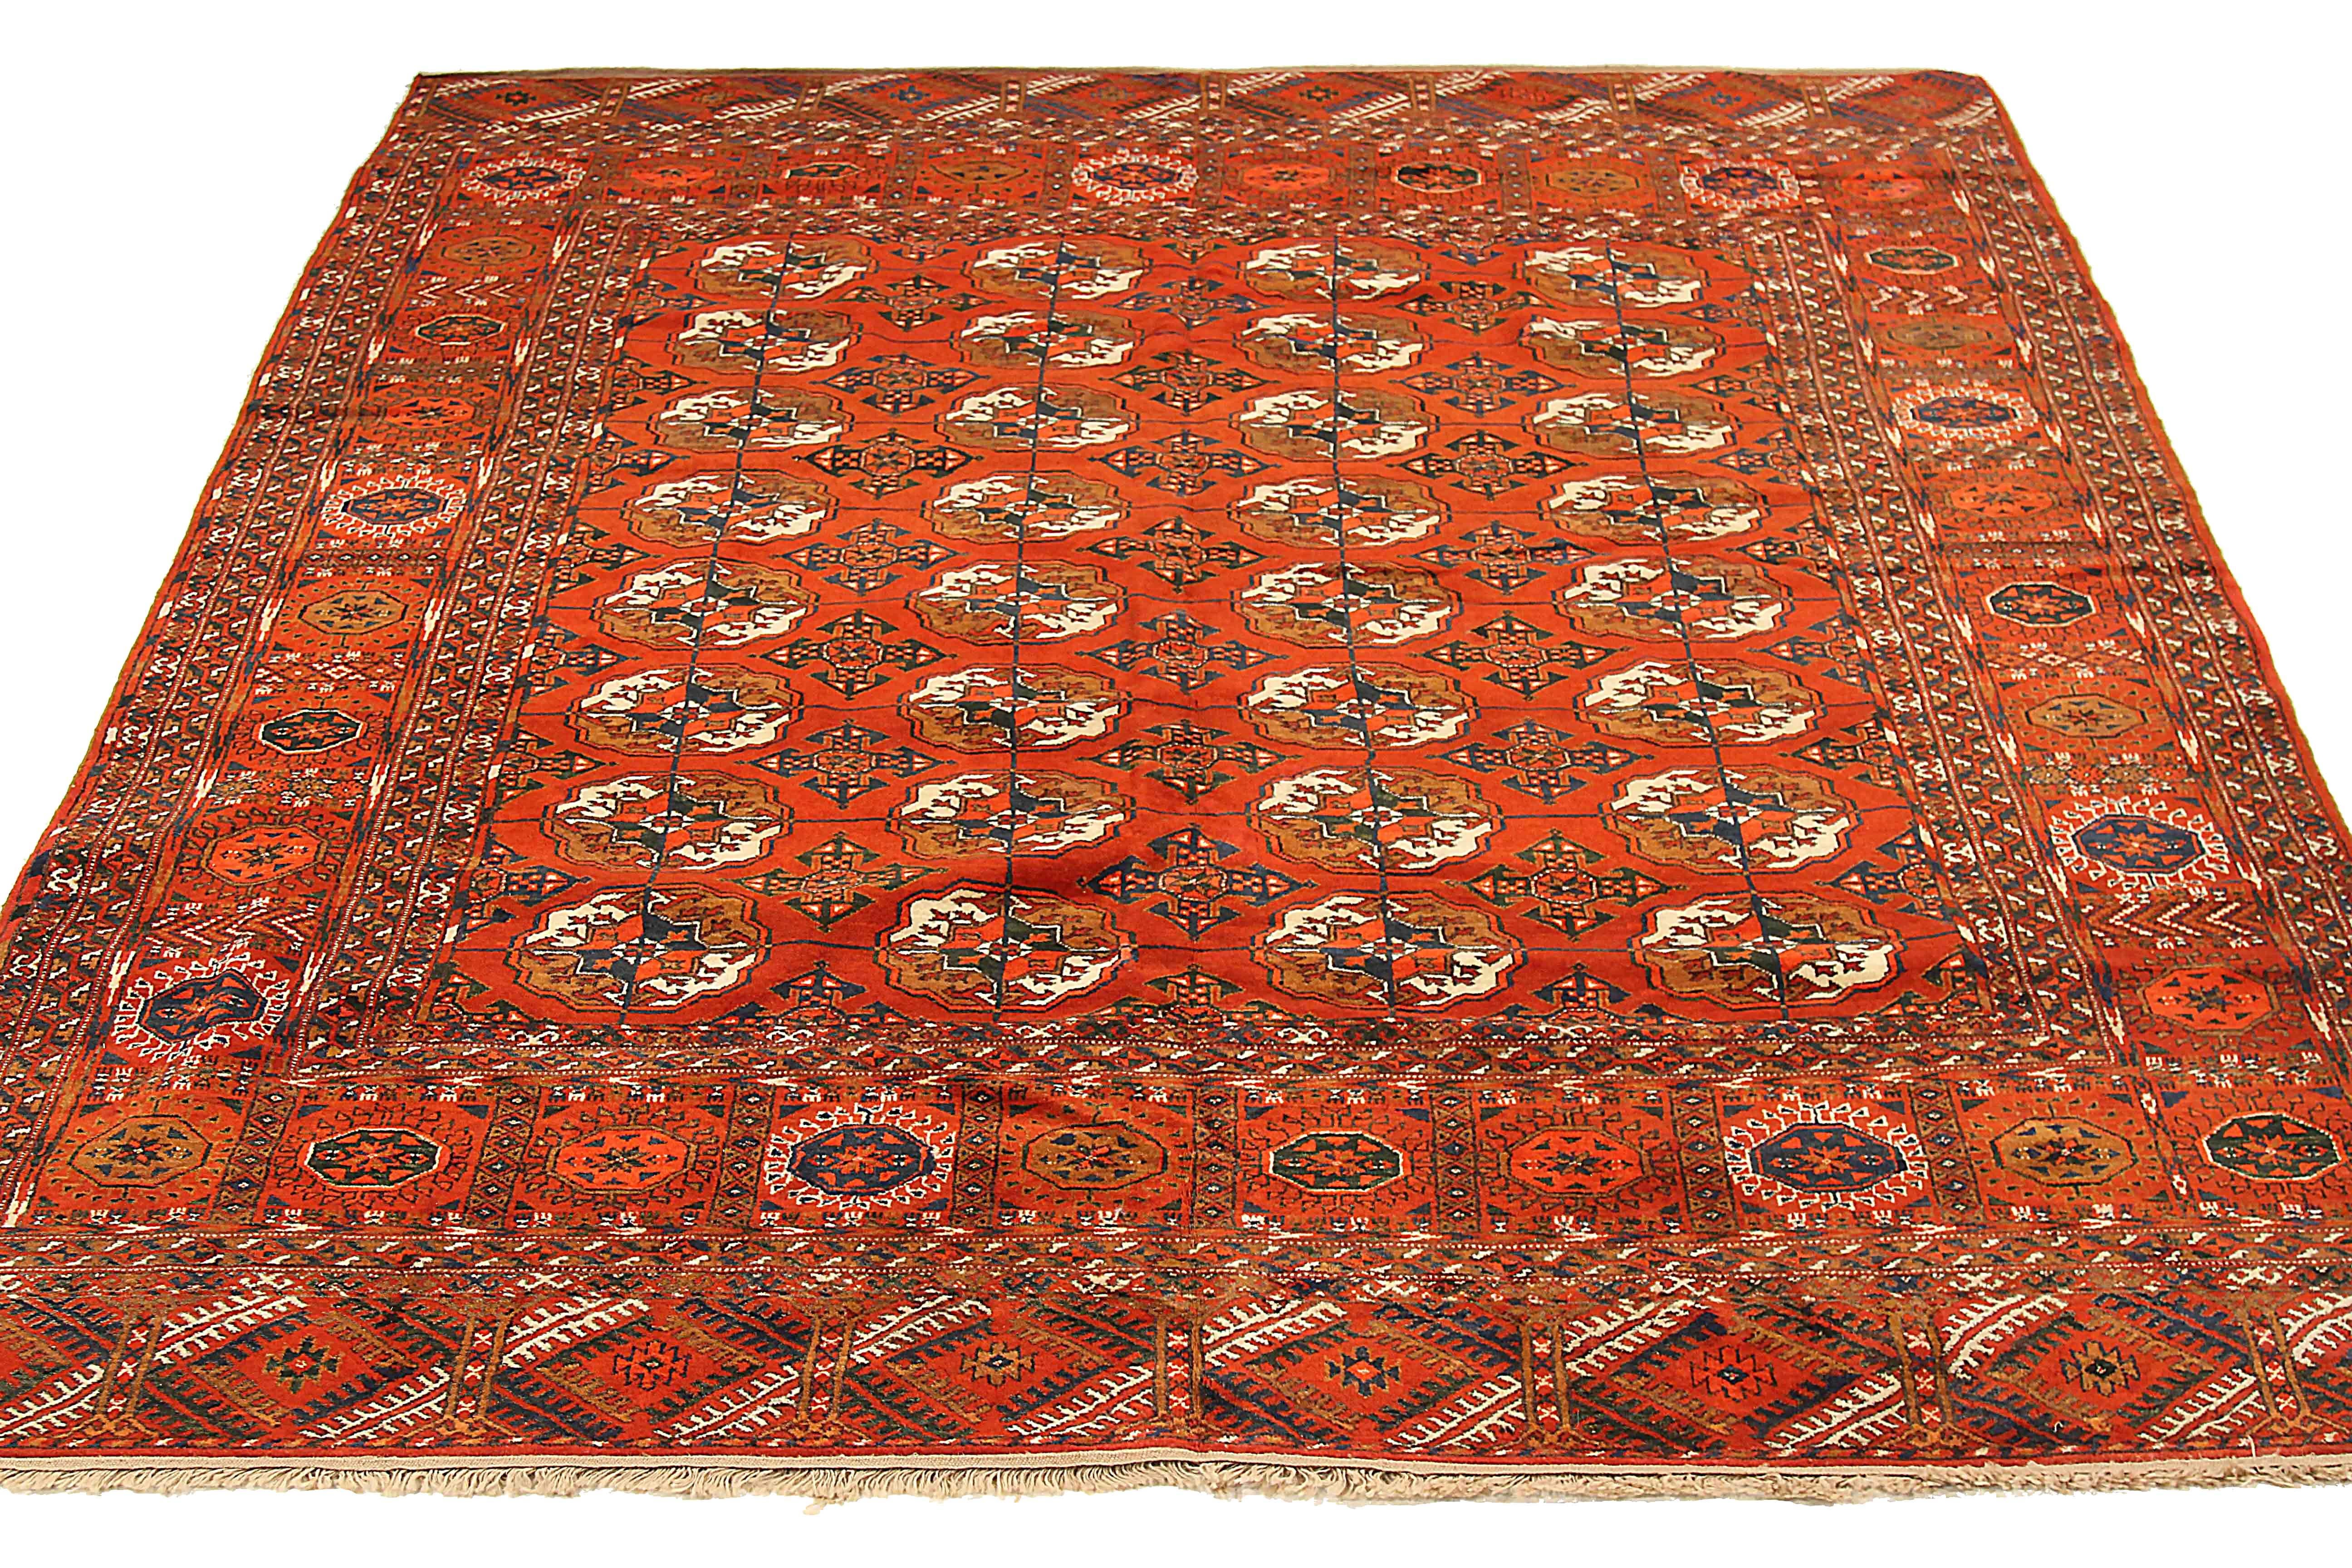 Antique Persian area rug handwoven from the finest sheep’s wool. It’s colored with all-natural vegetable dyes that are safe for humans and pets. It’s a traditional Turkeman design handwoven by expert artisans. It’s a lovely square rug that can be